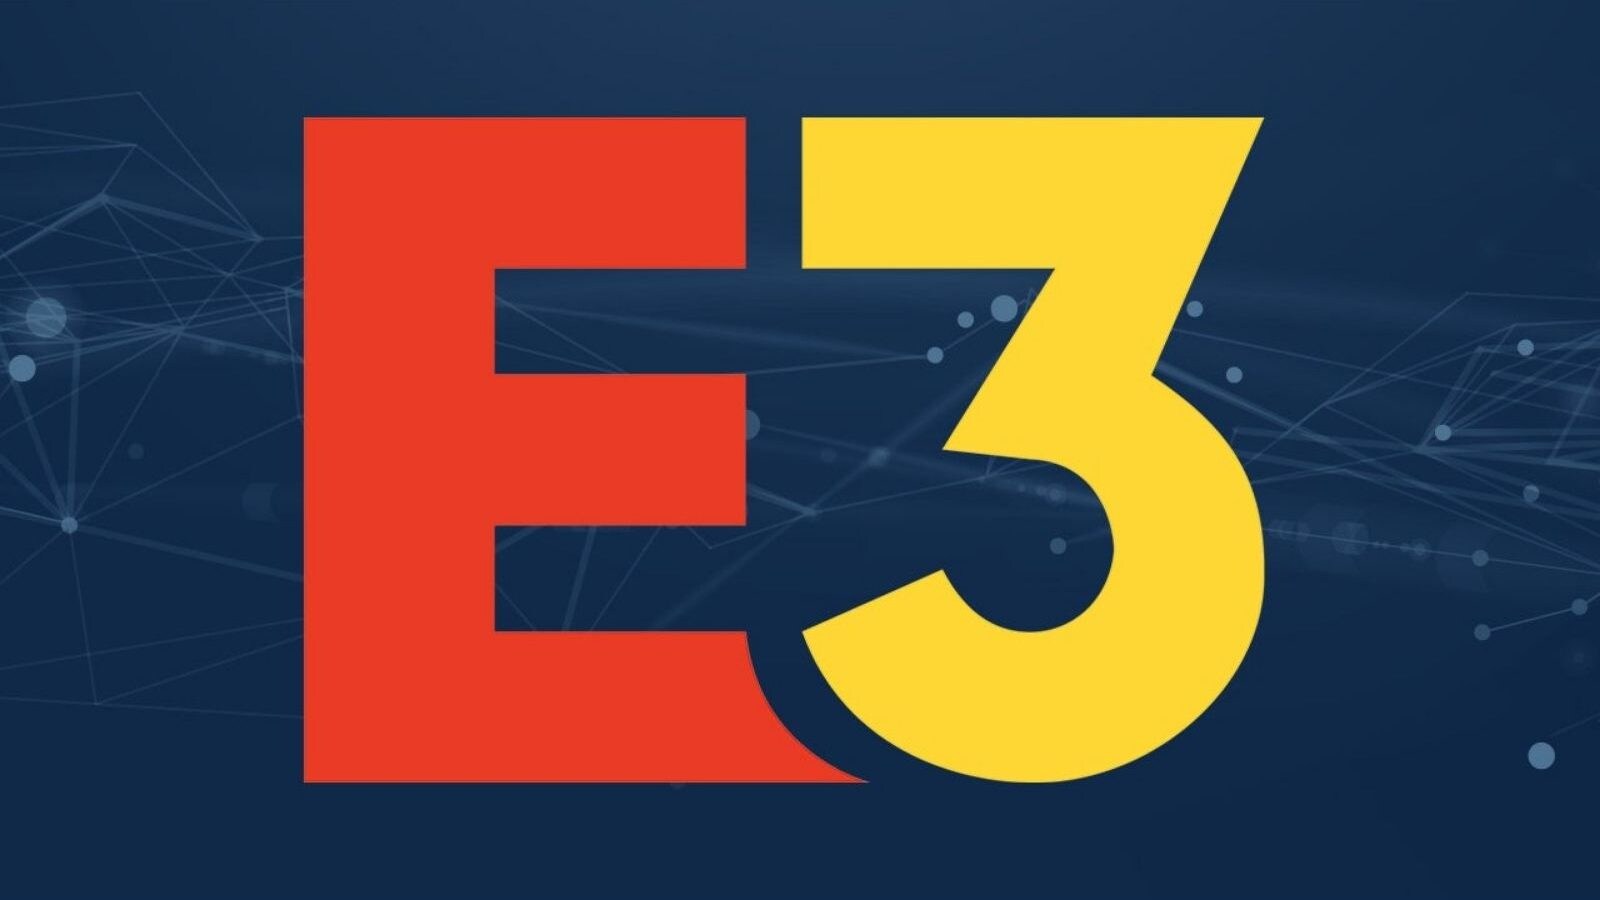 E3 2022 Gaming Expo Will Be Held Virtually Due To Rising Omicron Cases